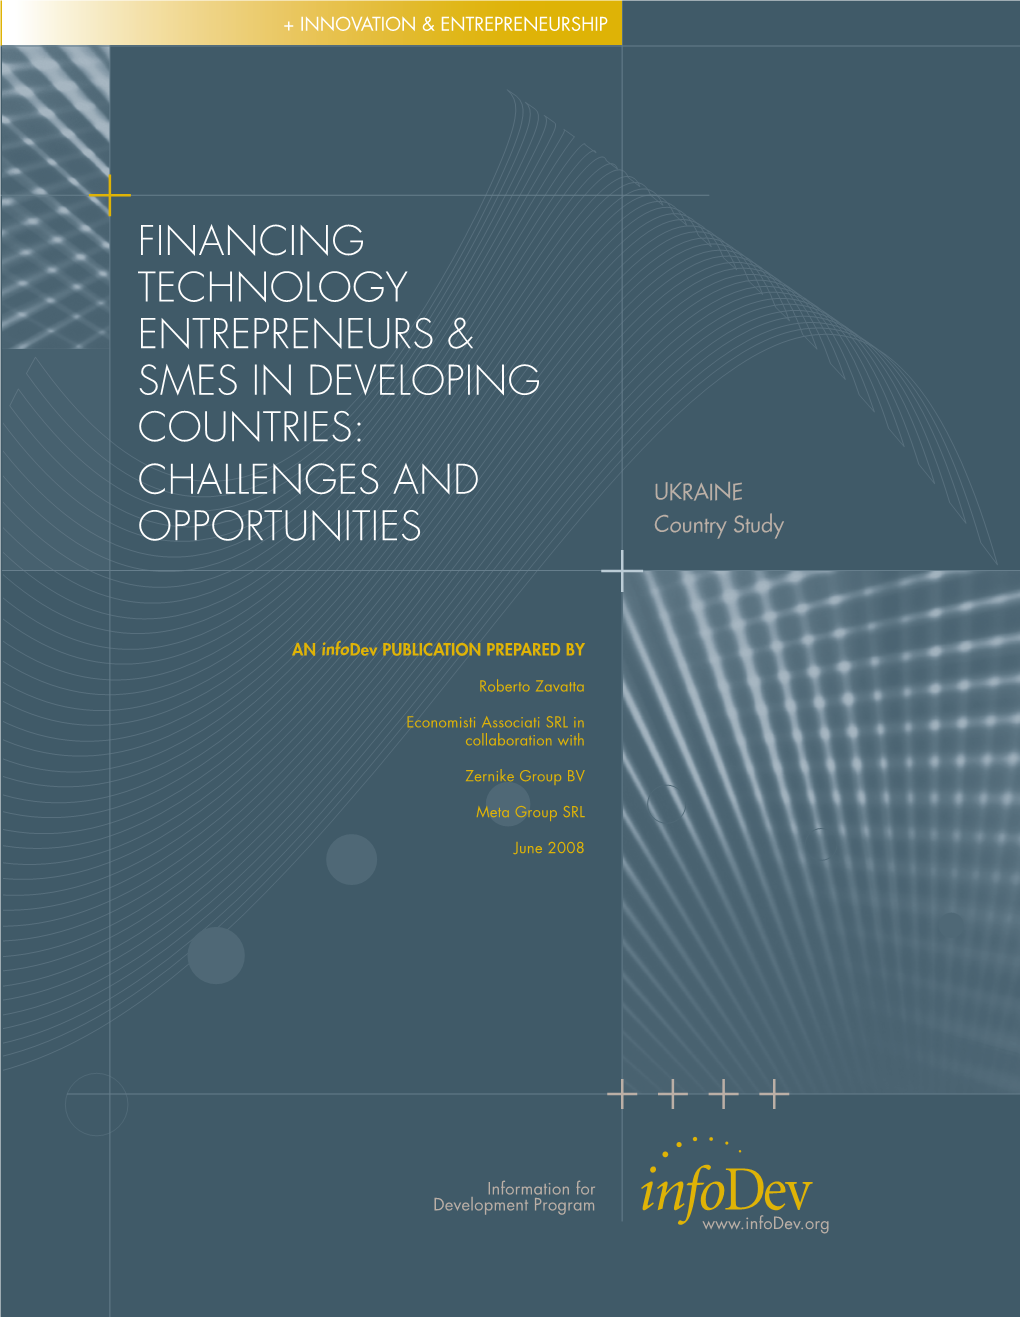 Financing Technology Entrepreneurs & Smes in Developing Countries: Challenges and Opportunities